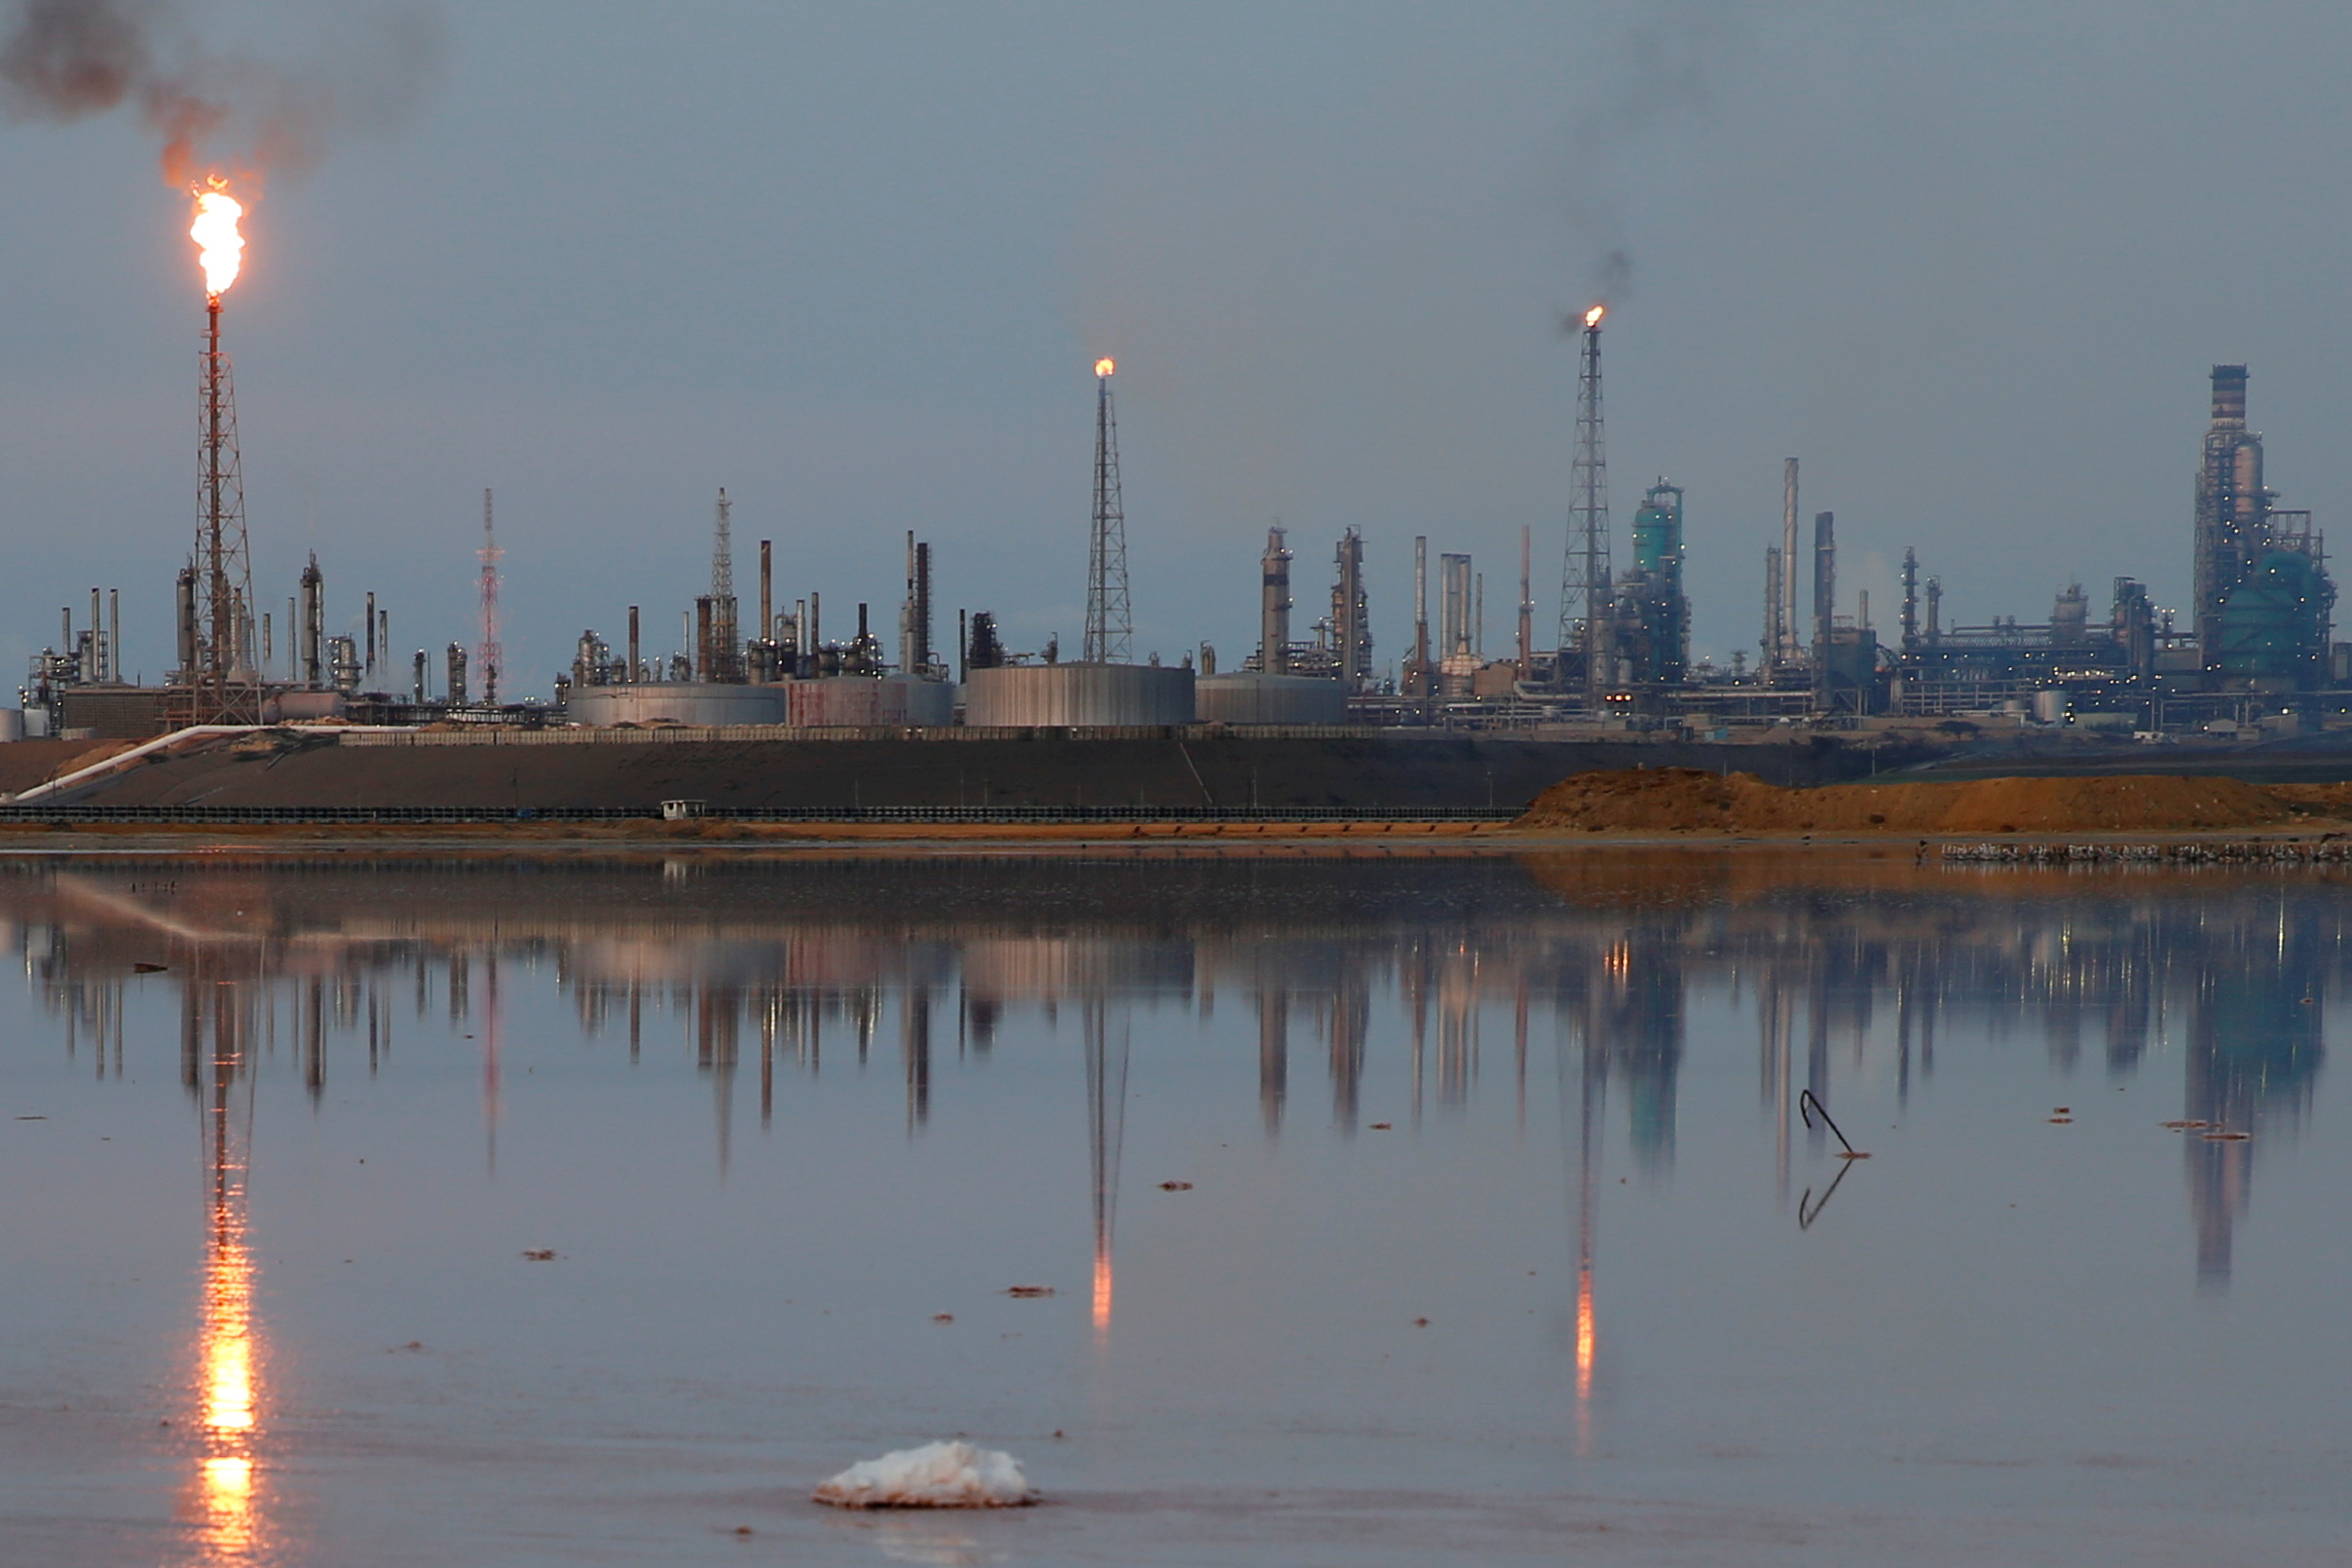 A general view of the Amuay refinery complex which belongs to the Venezuelan state oil company PDVSA in Punto Fijo